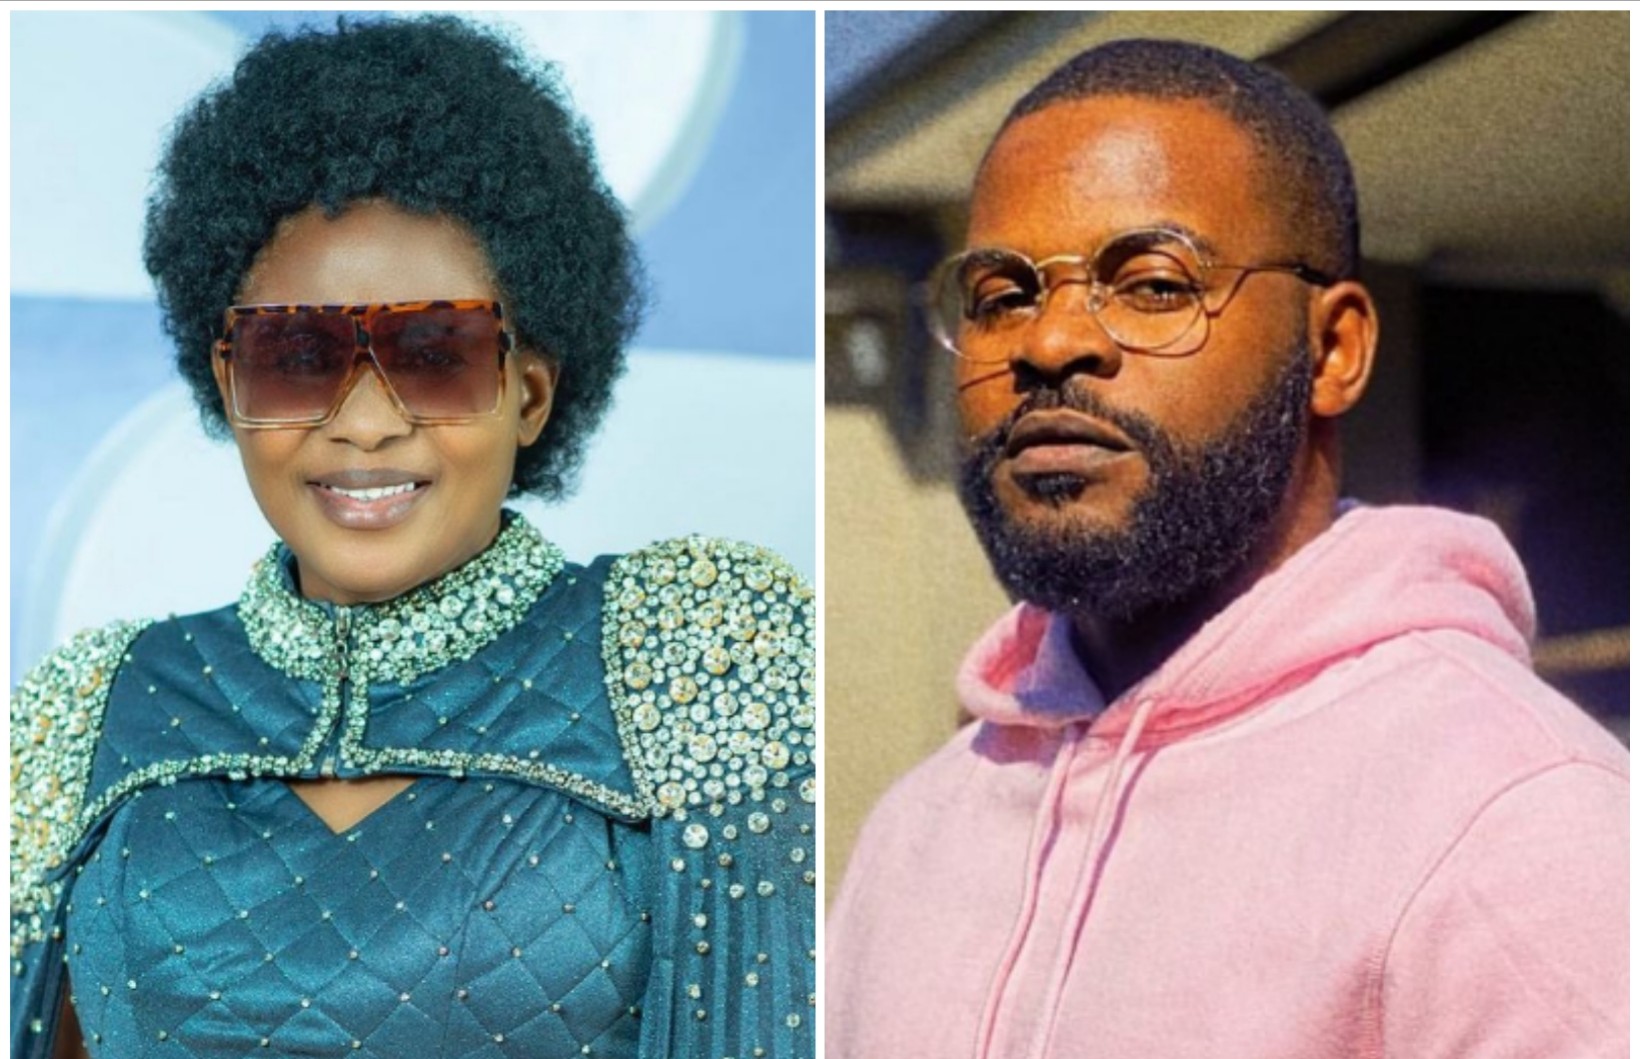 Falz Showcases His Young Mother as She Celebrates Her Birthday